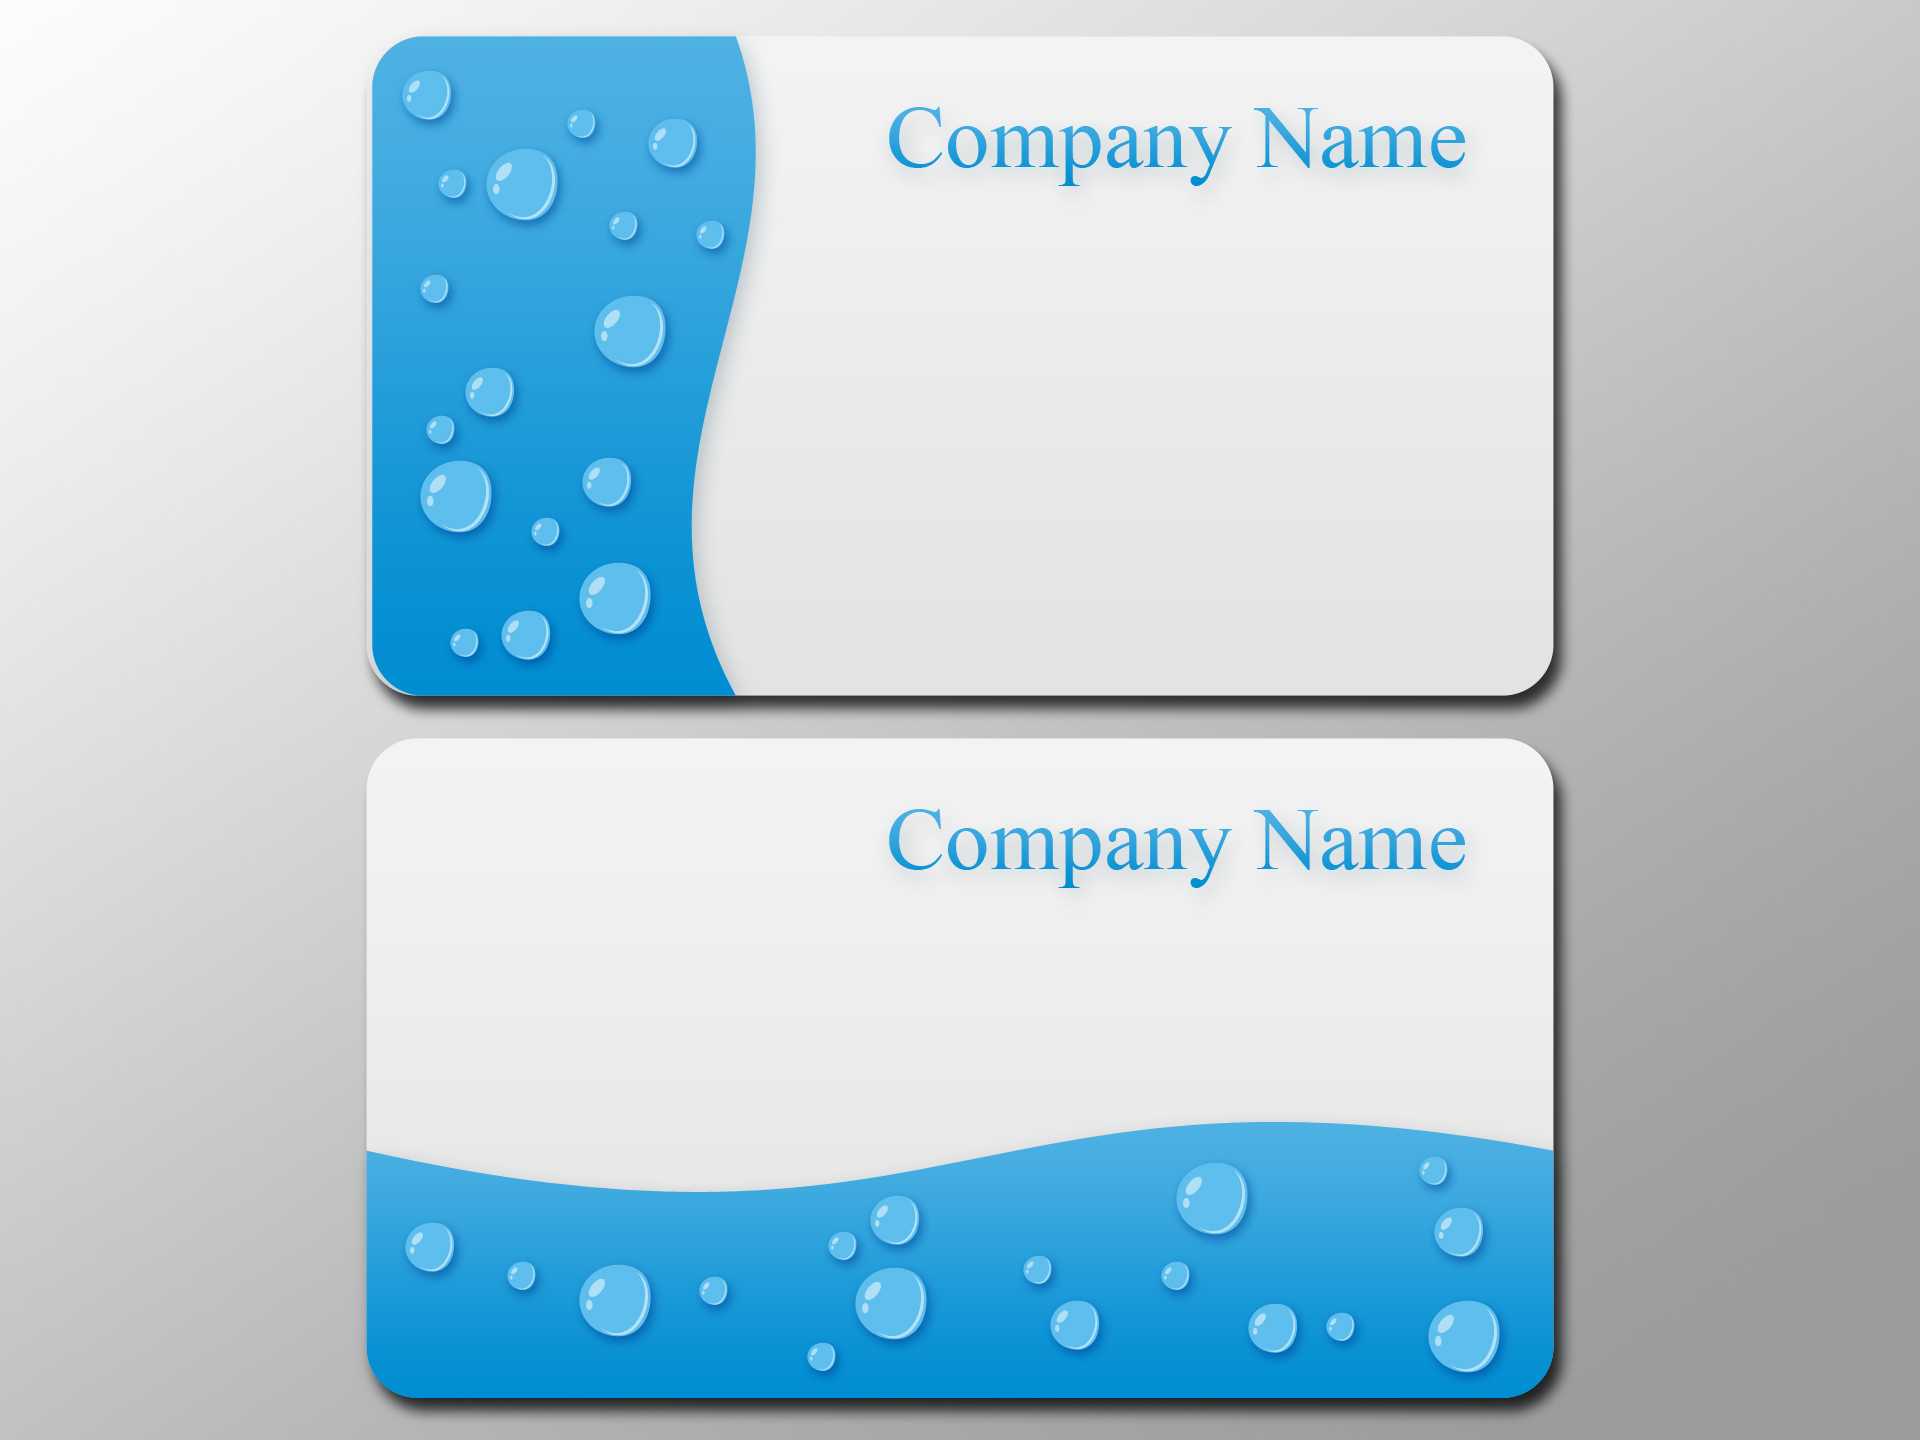 003 Free Blank Business Card Templates Photoshop 626190 For Template Name Card Psd